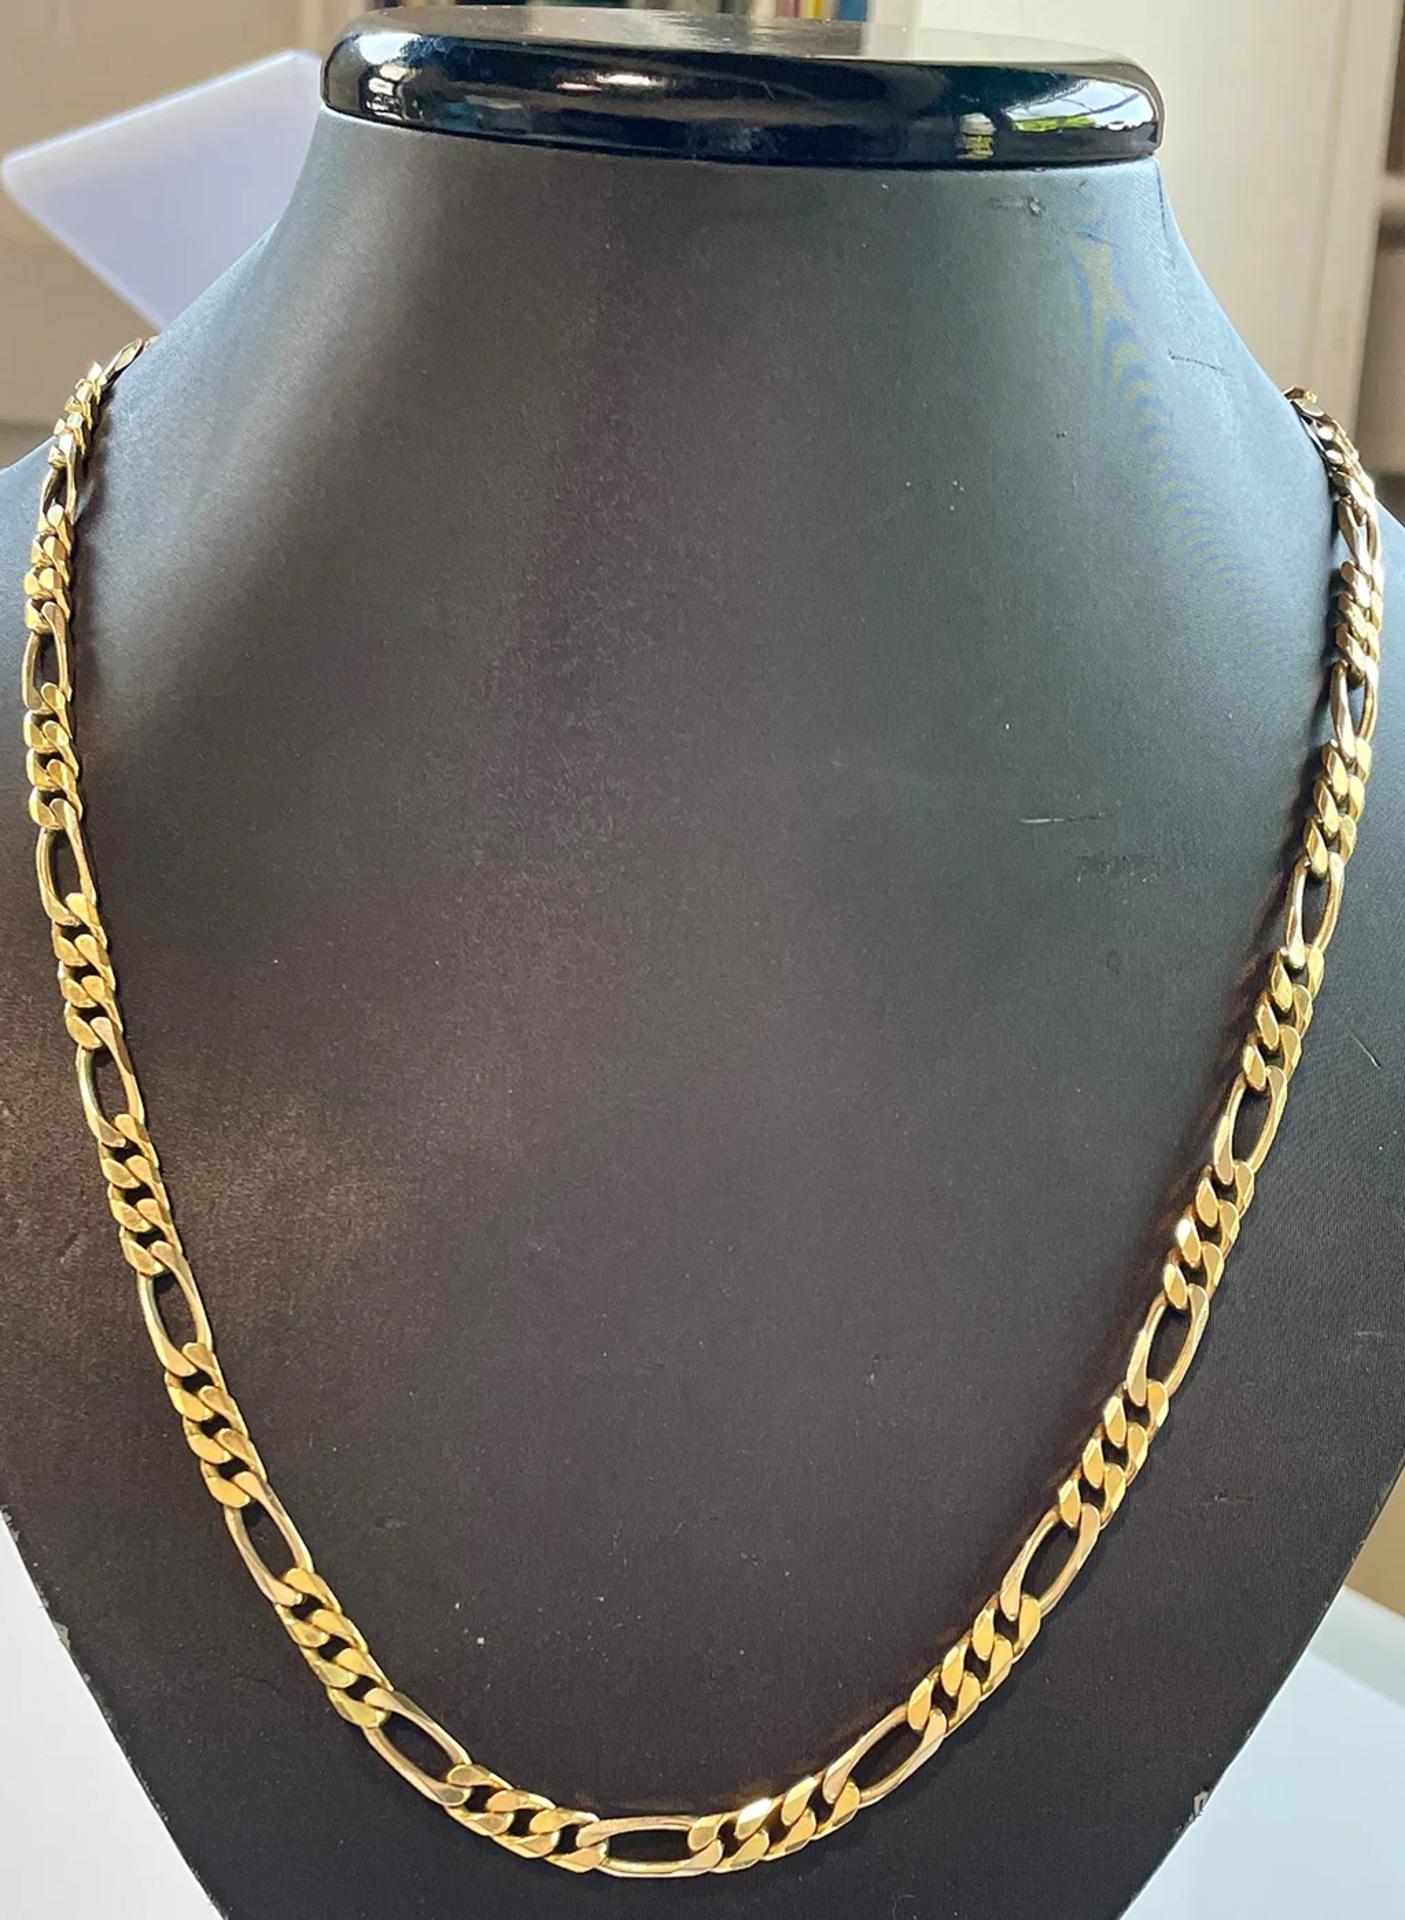 Heavy Men's Necklace Curb Chain 18K Yellow Gold - Image 2 of 3